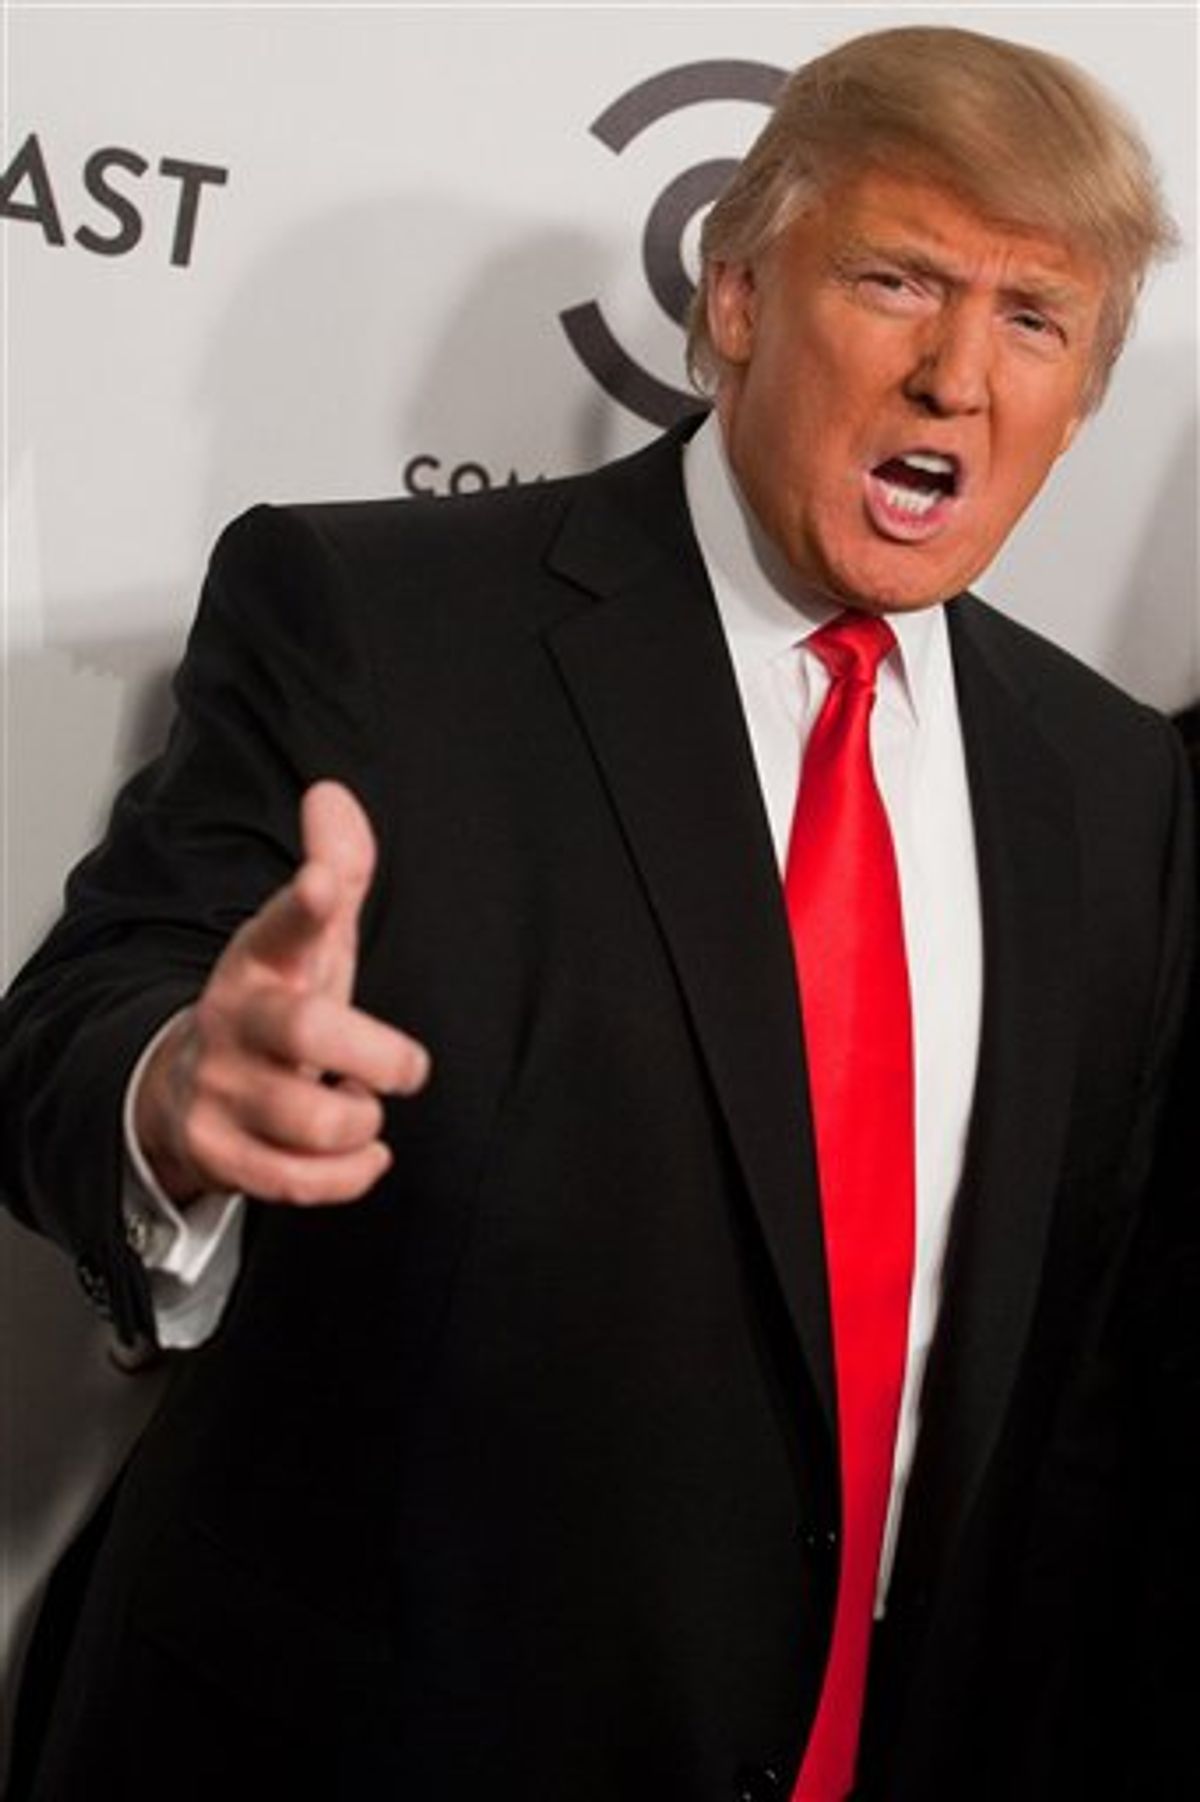 Donald Trump arrives to his Comedy Central Roast in New York, Wednesday, March 9, 2011. (AP Photo/Charles Sykes)  (AP)